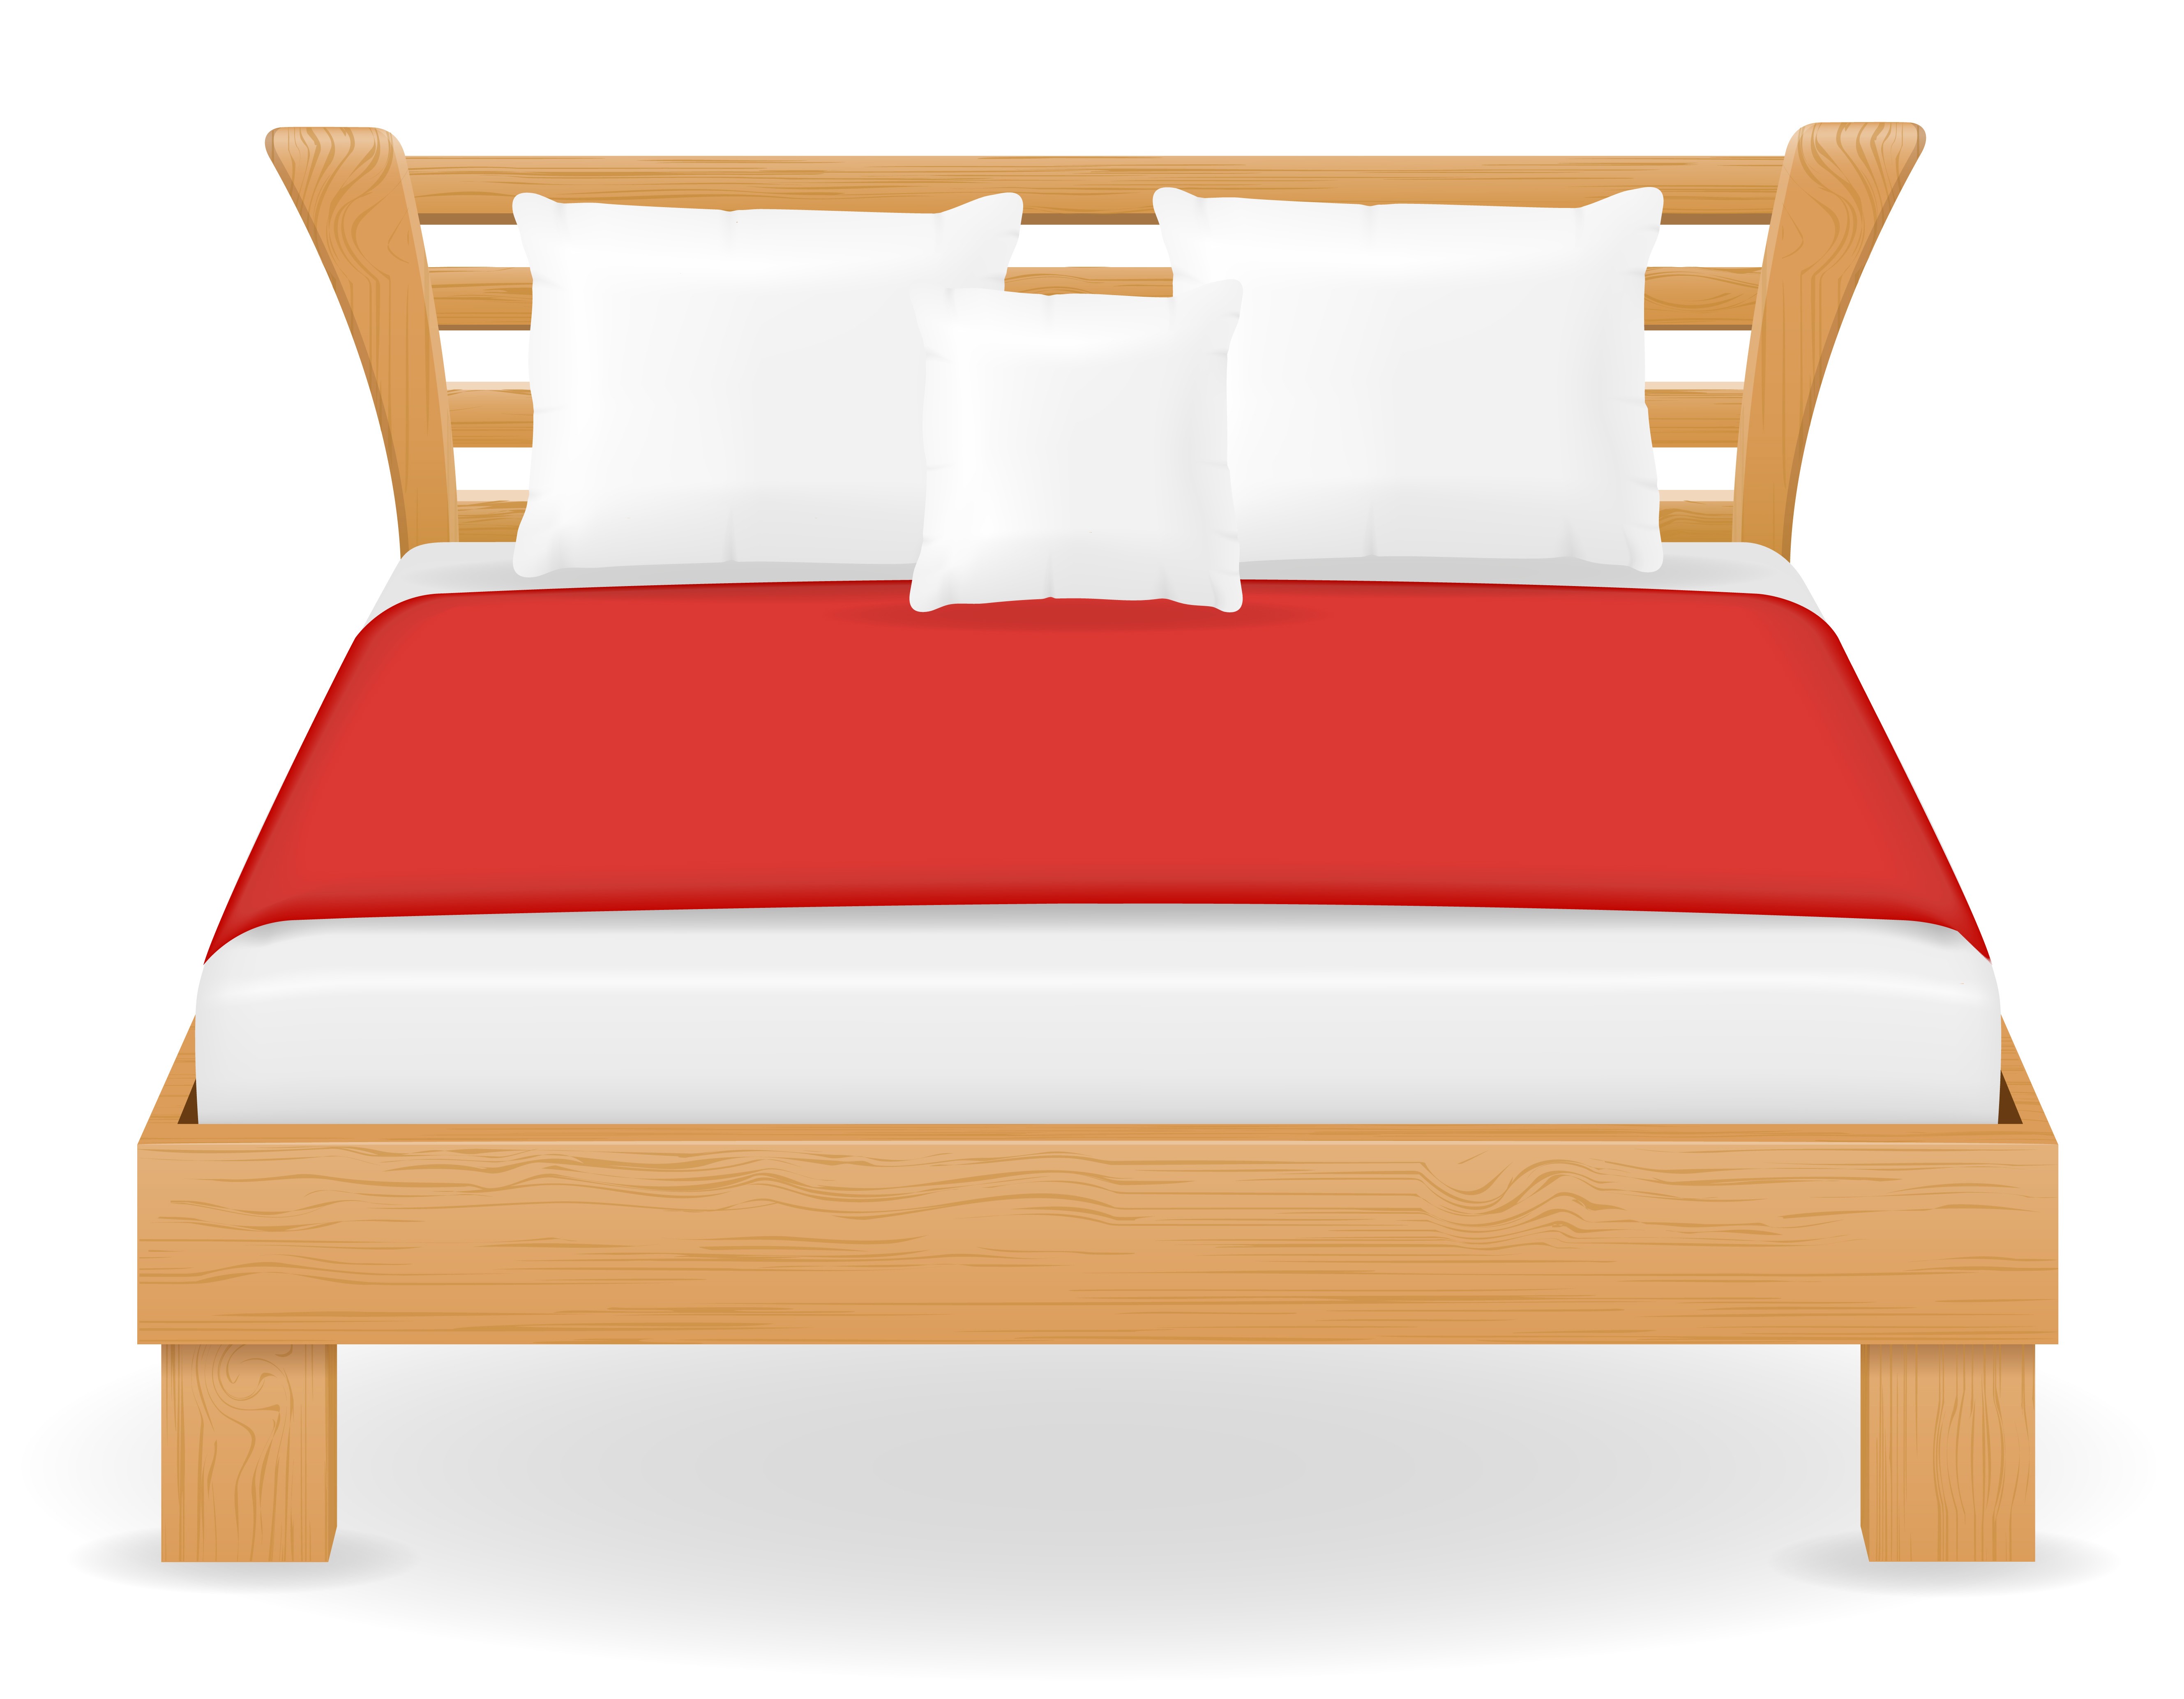 double bed furniture vector illustration 489249 Download